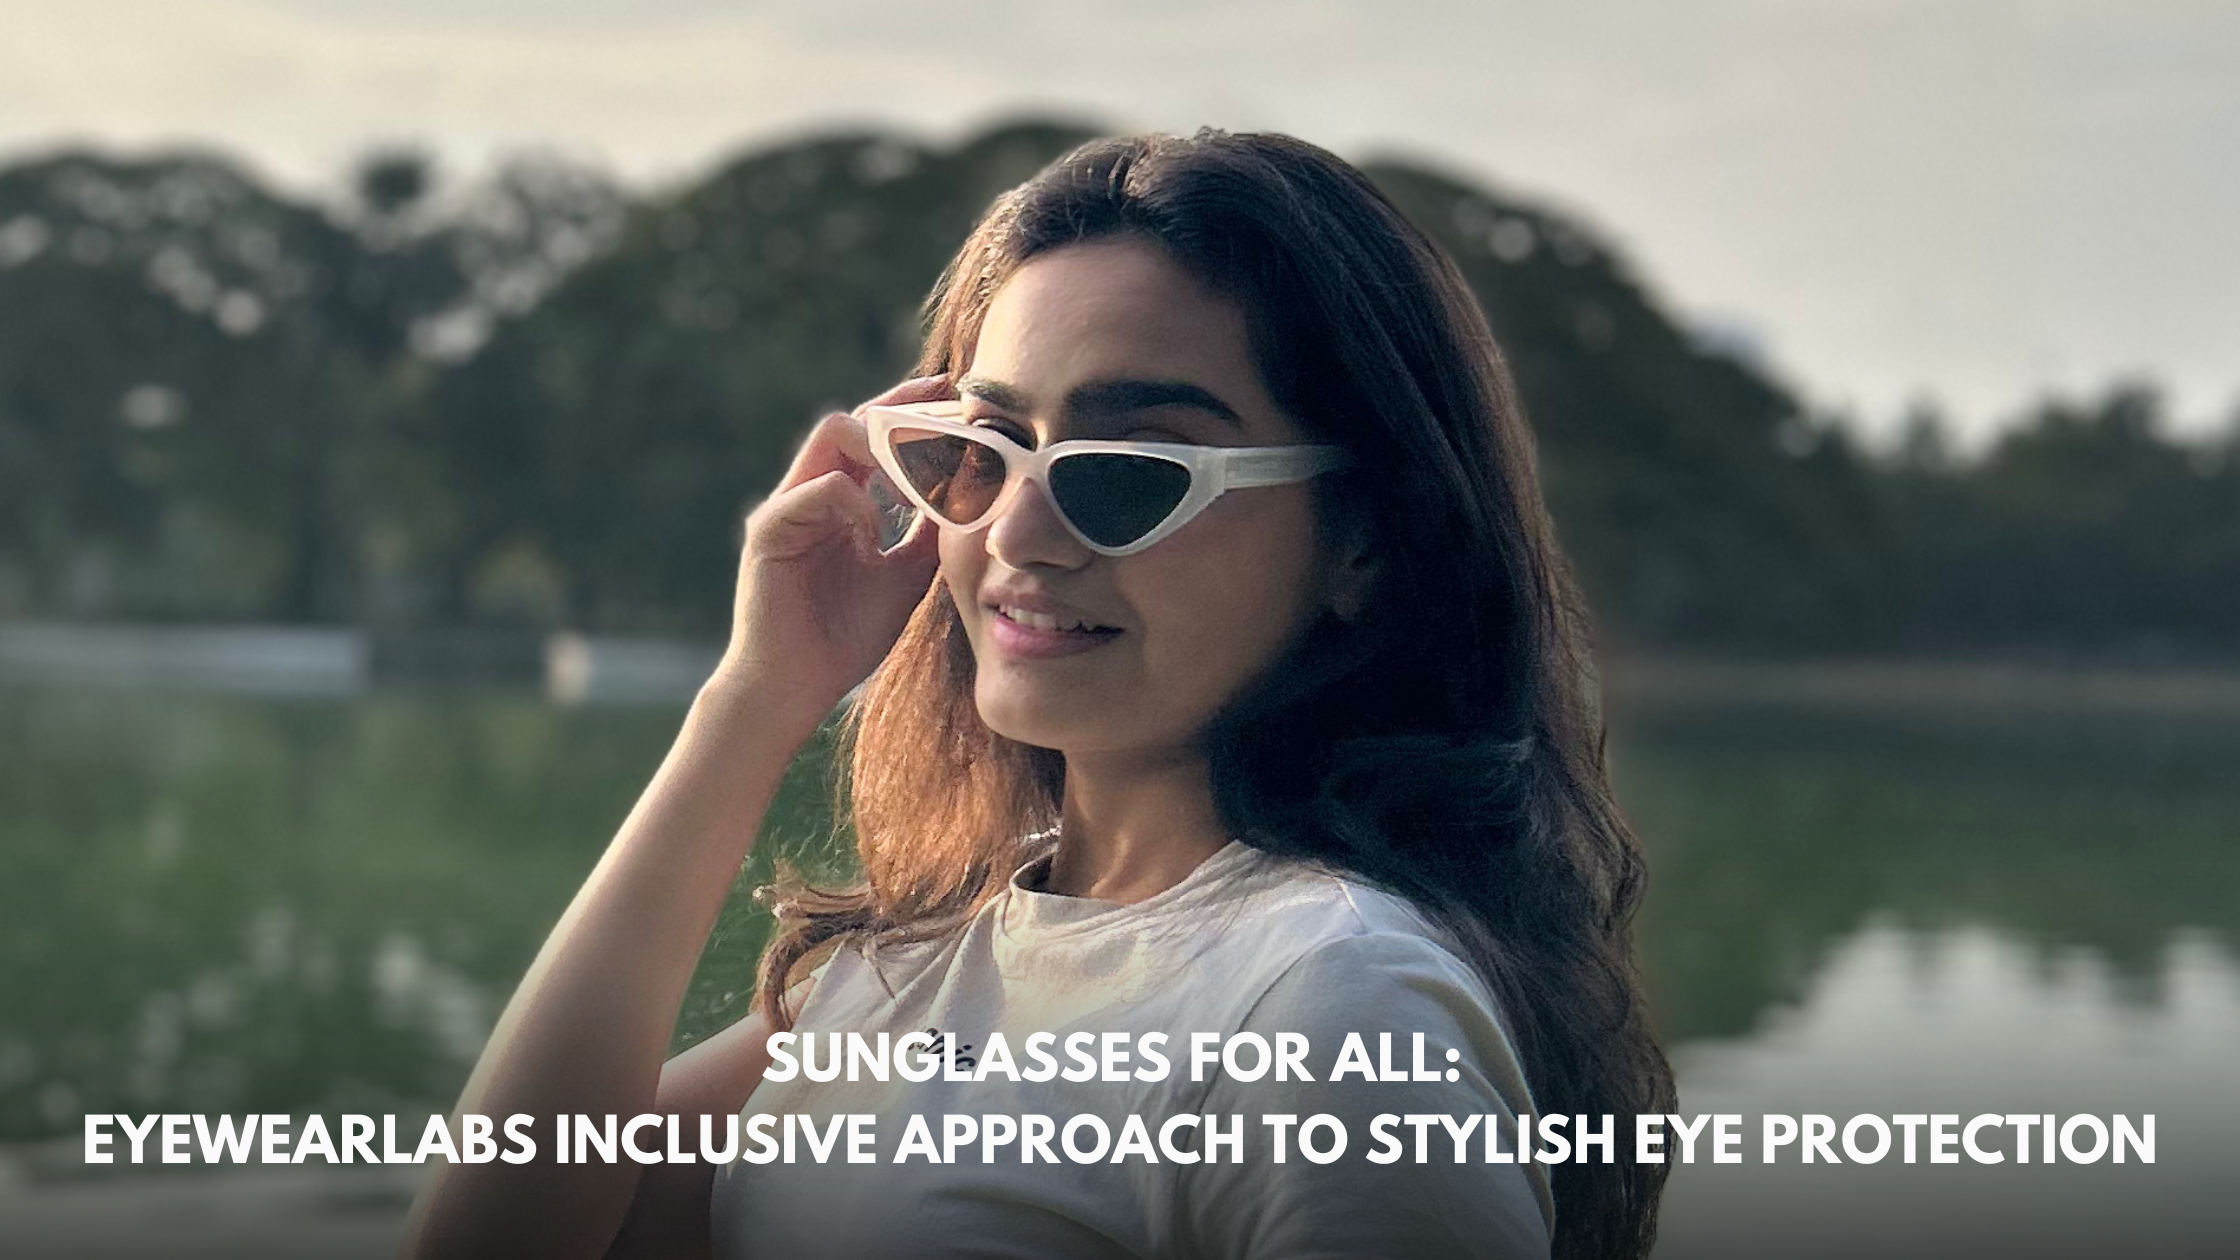 Sunglasses for All: Eyewearlabs Inclusive Approach to Stylish Eye Protection